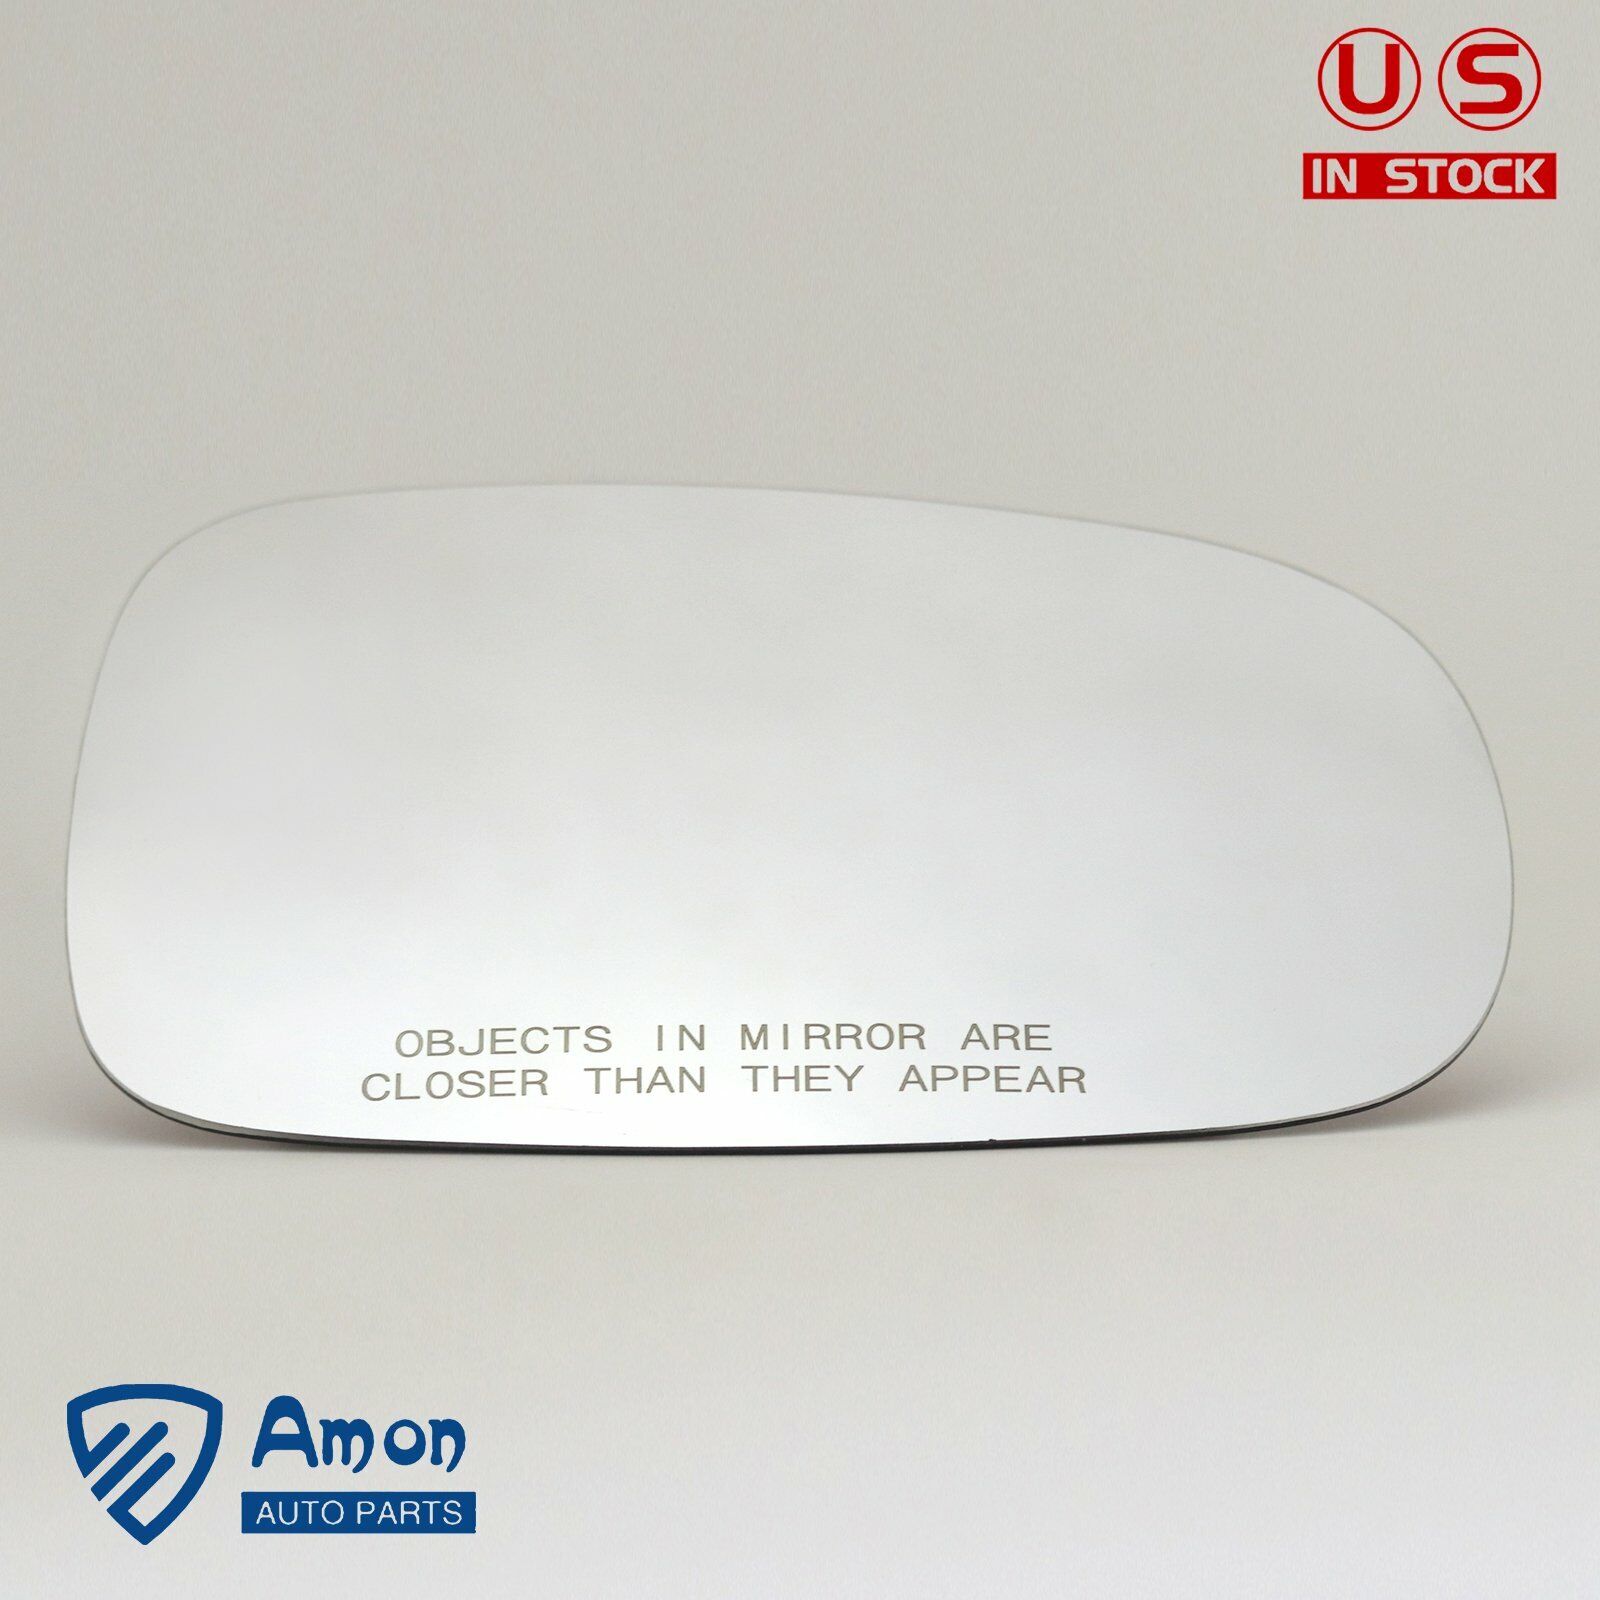 Passenger Side Mirror Glass Right Full Adhesive for 03-11 SAAB 9-3 9-3x 93 9-5